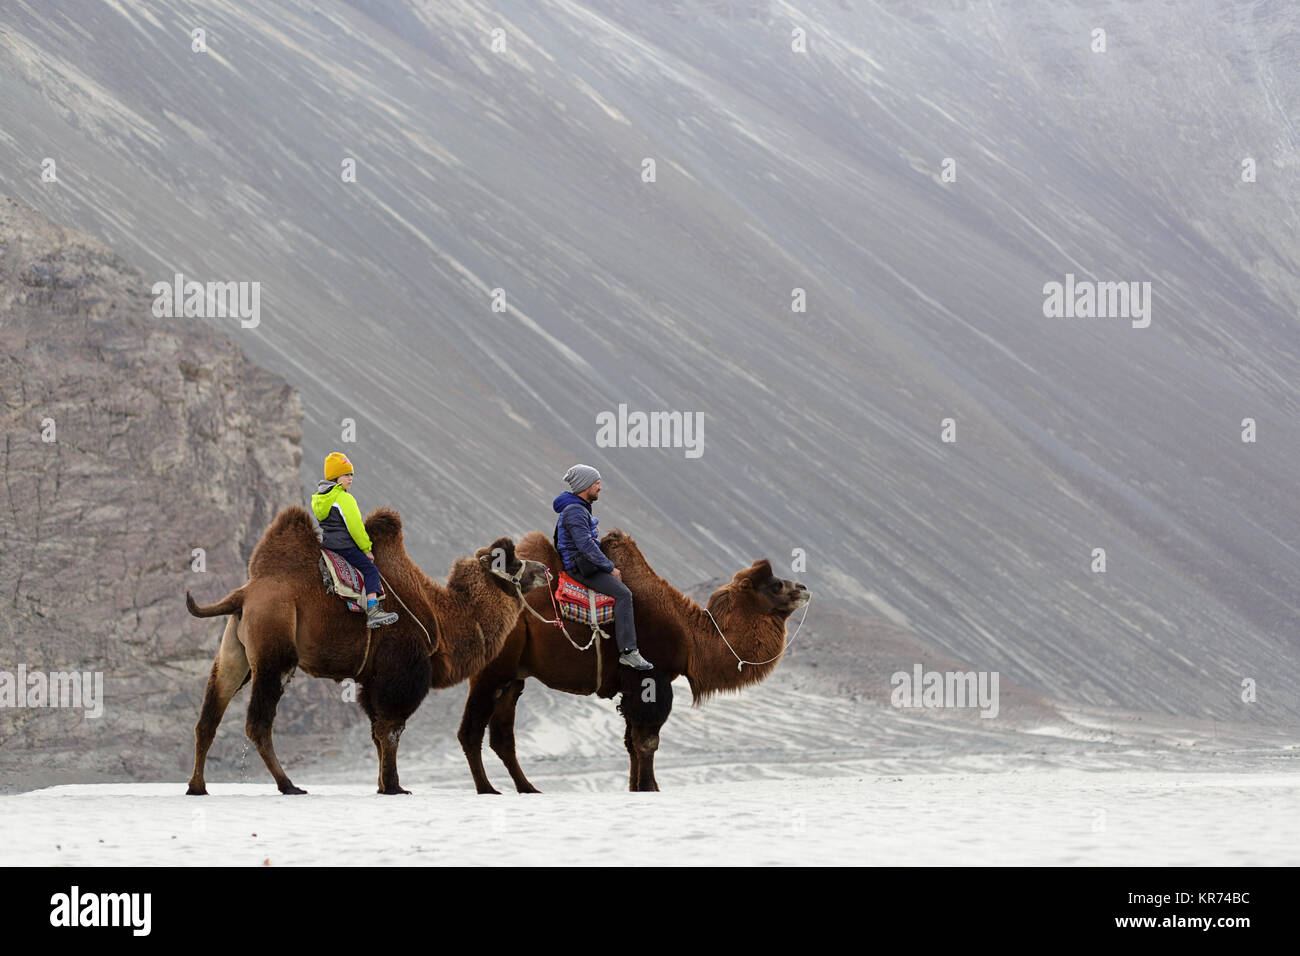 Father and son riding double hump camel and crossing the desert in the Nubra valley, Ladakh, Jammu and Kashmir, India Stock Photo